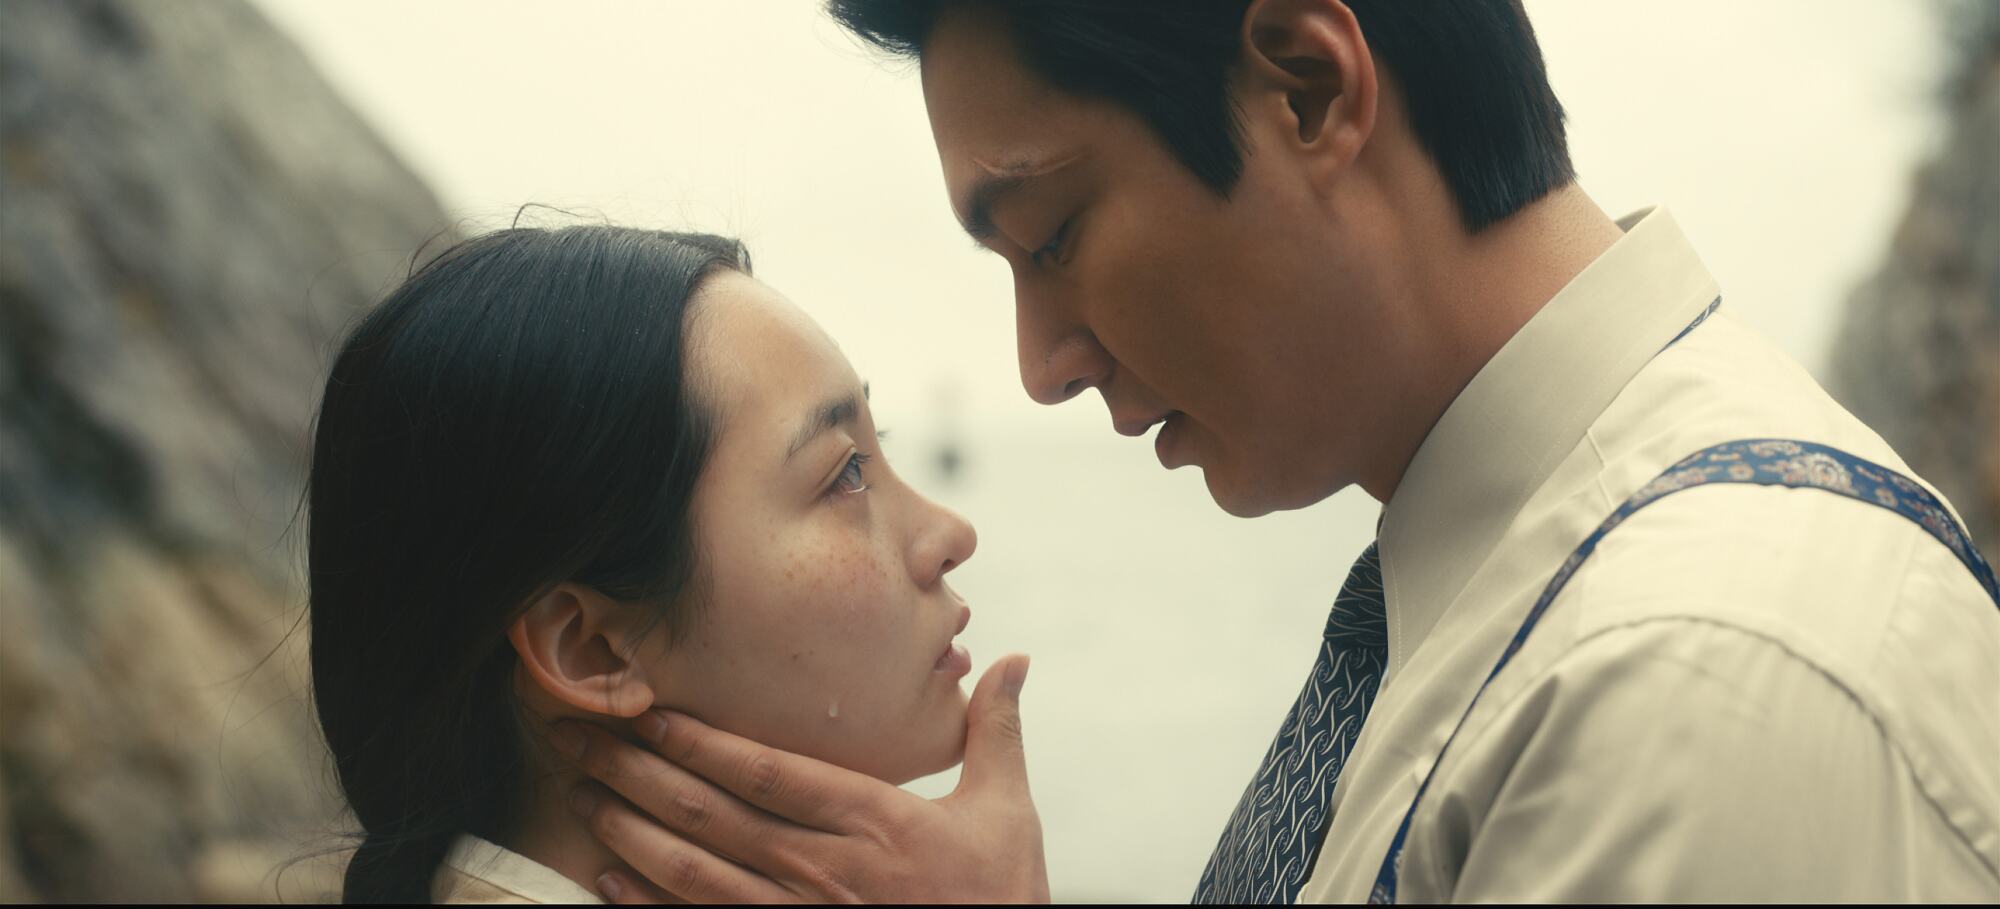 A man and woman look at each other tenderly in a scene from "Pachinko." 